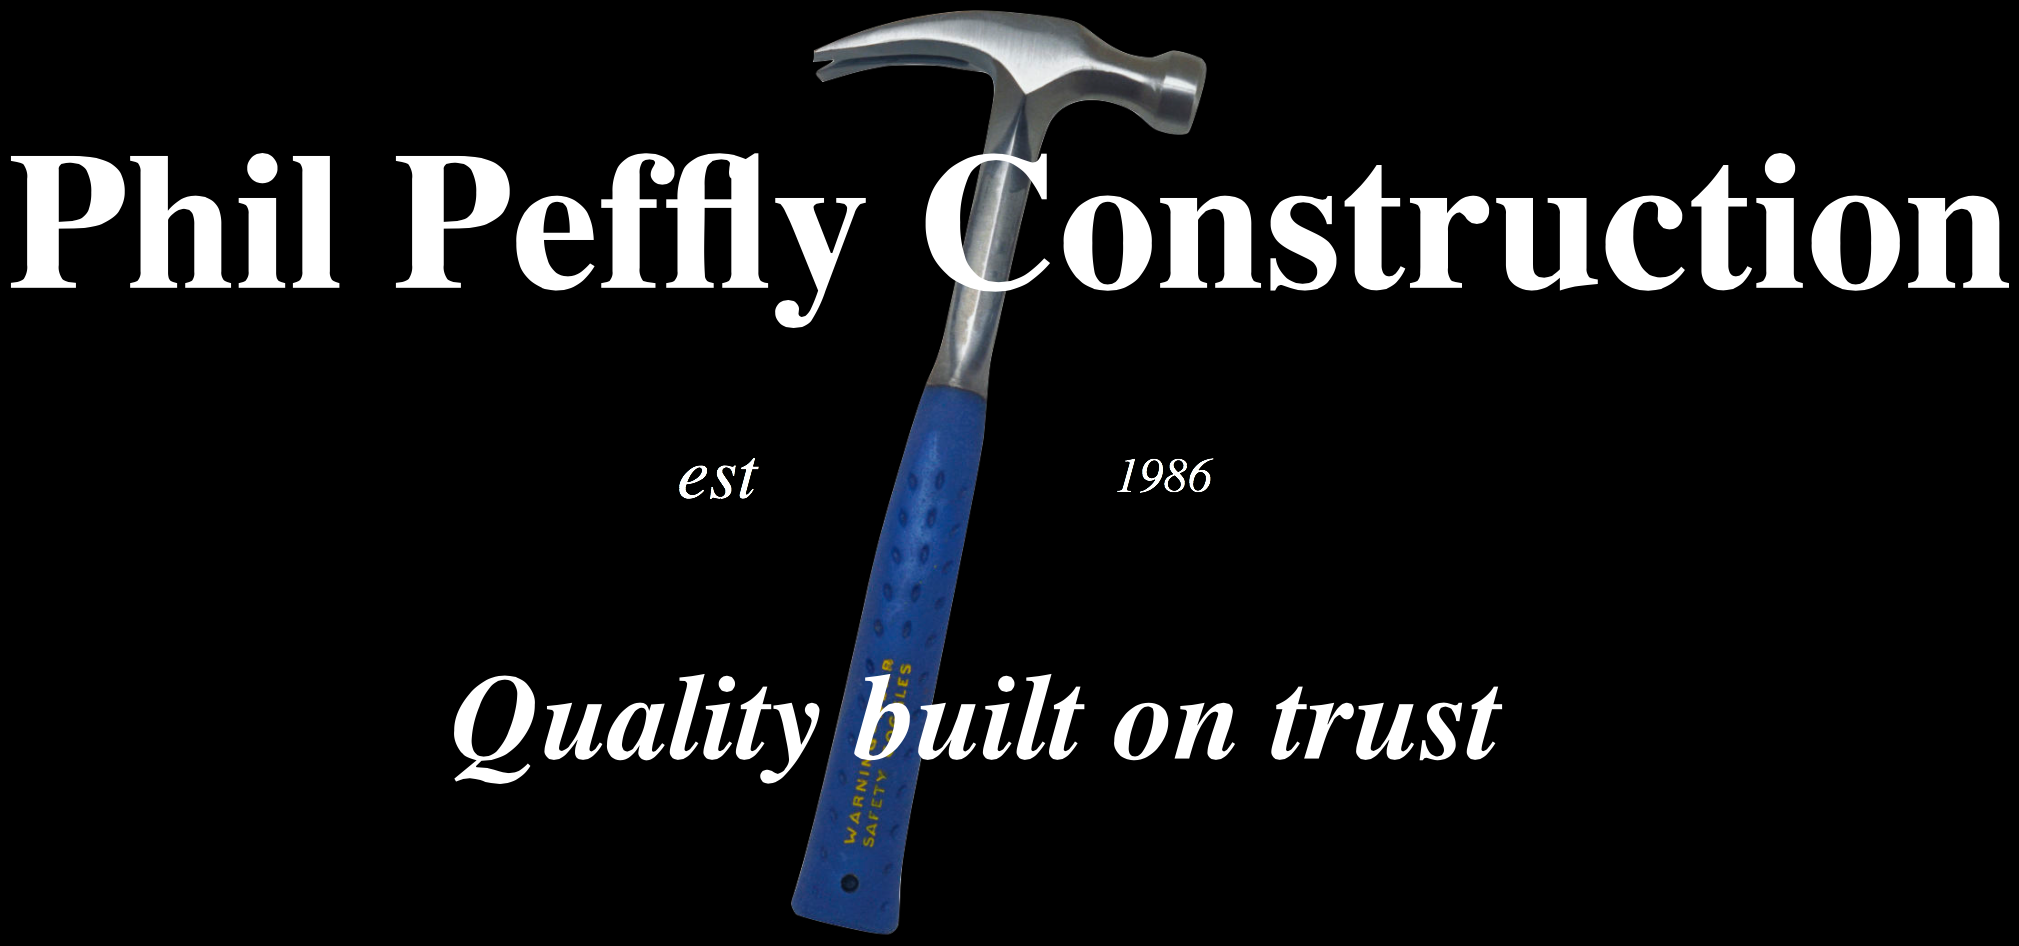 Phil Peffly Construction Co. Logo